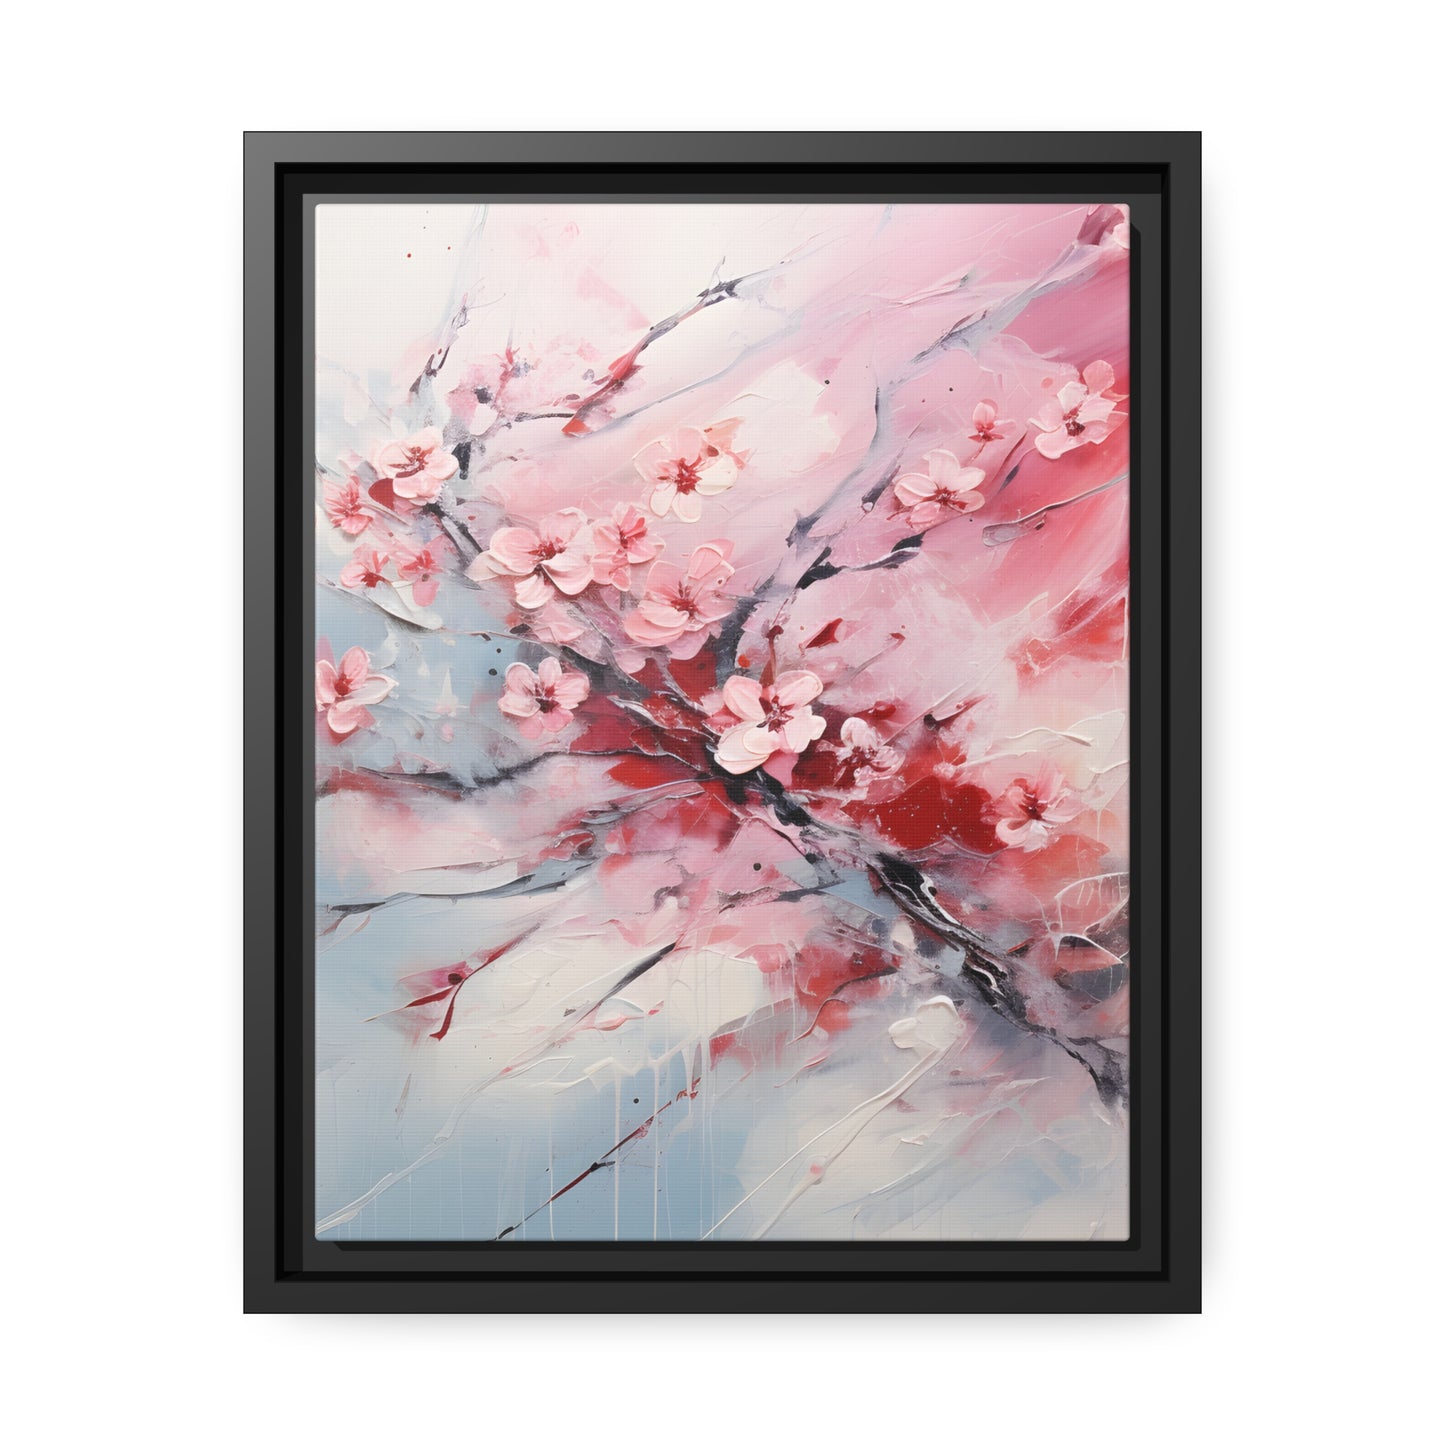 Framed Canvas Nature Inspired Artwork Stunning Gloomy Cherry Blossom Tree Oil Painting Style Framed Canvas Print